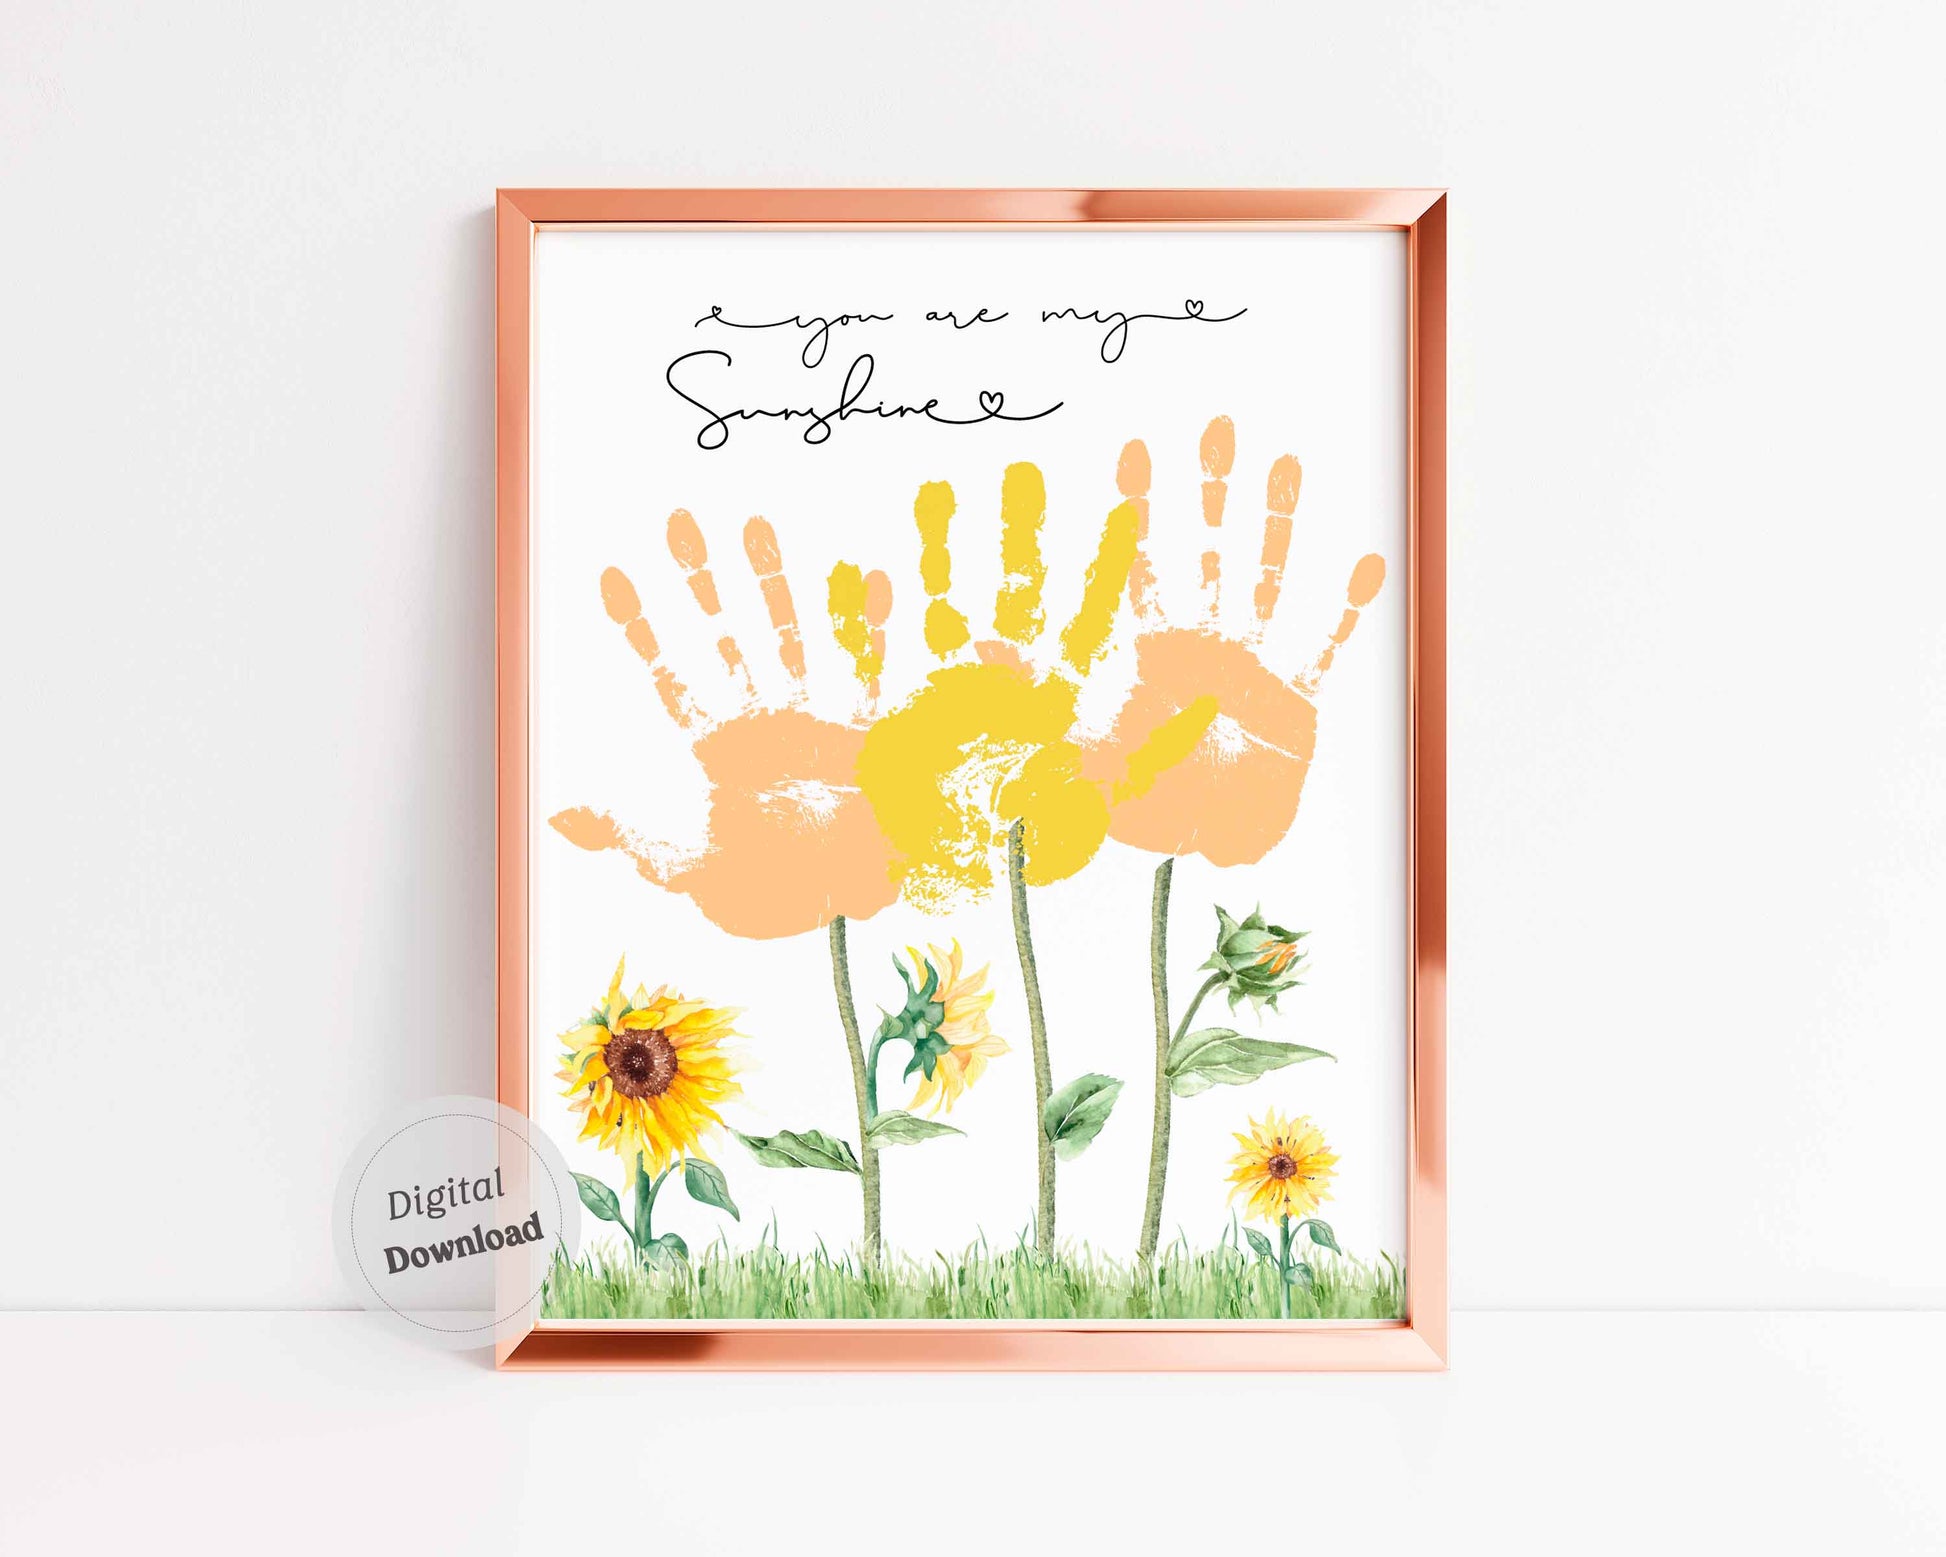 You are my sunshine handprint art with sunflowers